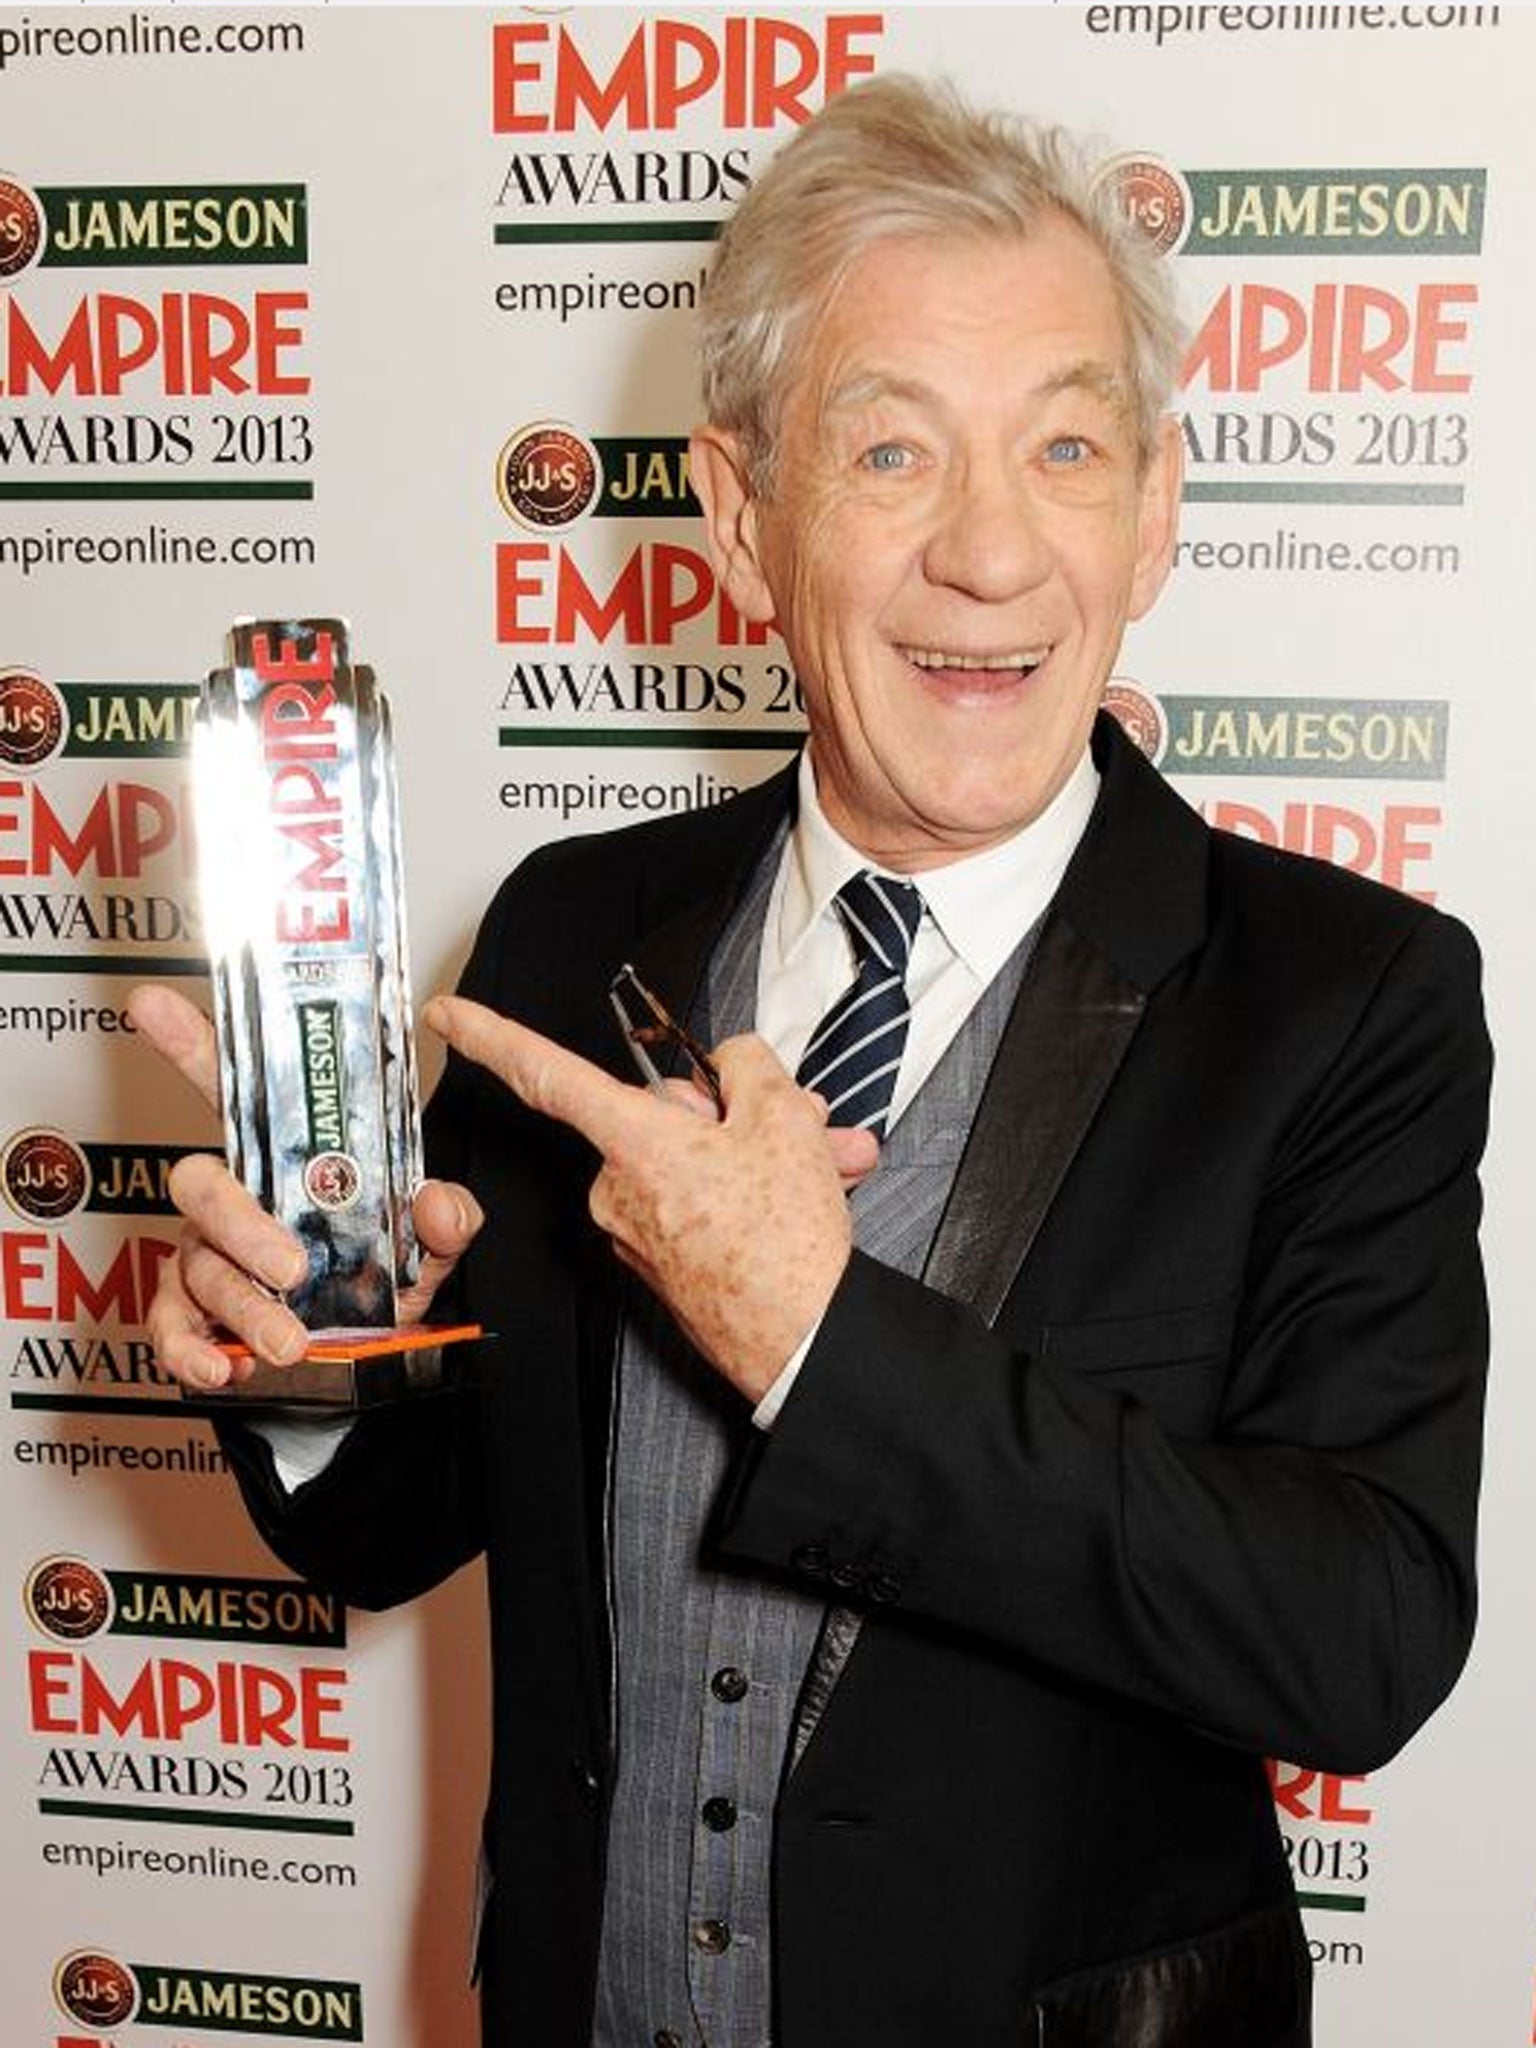 Sir Ian McKellen poses in the press room with the Best Science Fiction/Fantasy award for 'The Hobbit' at the Jameson Empire Awards 2013 at The Grosvenor House Hotel